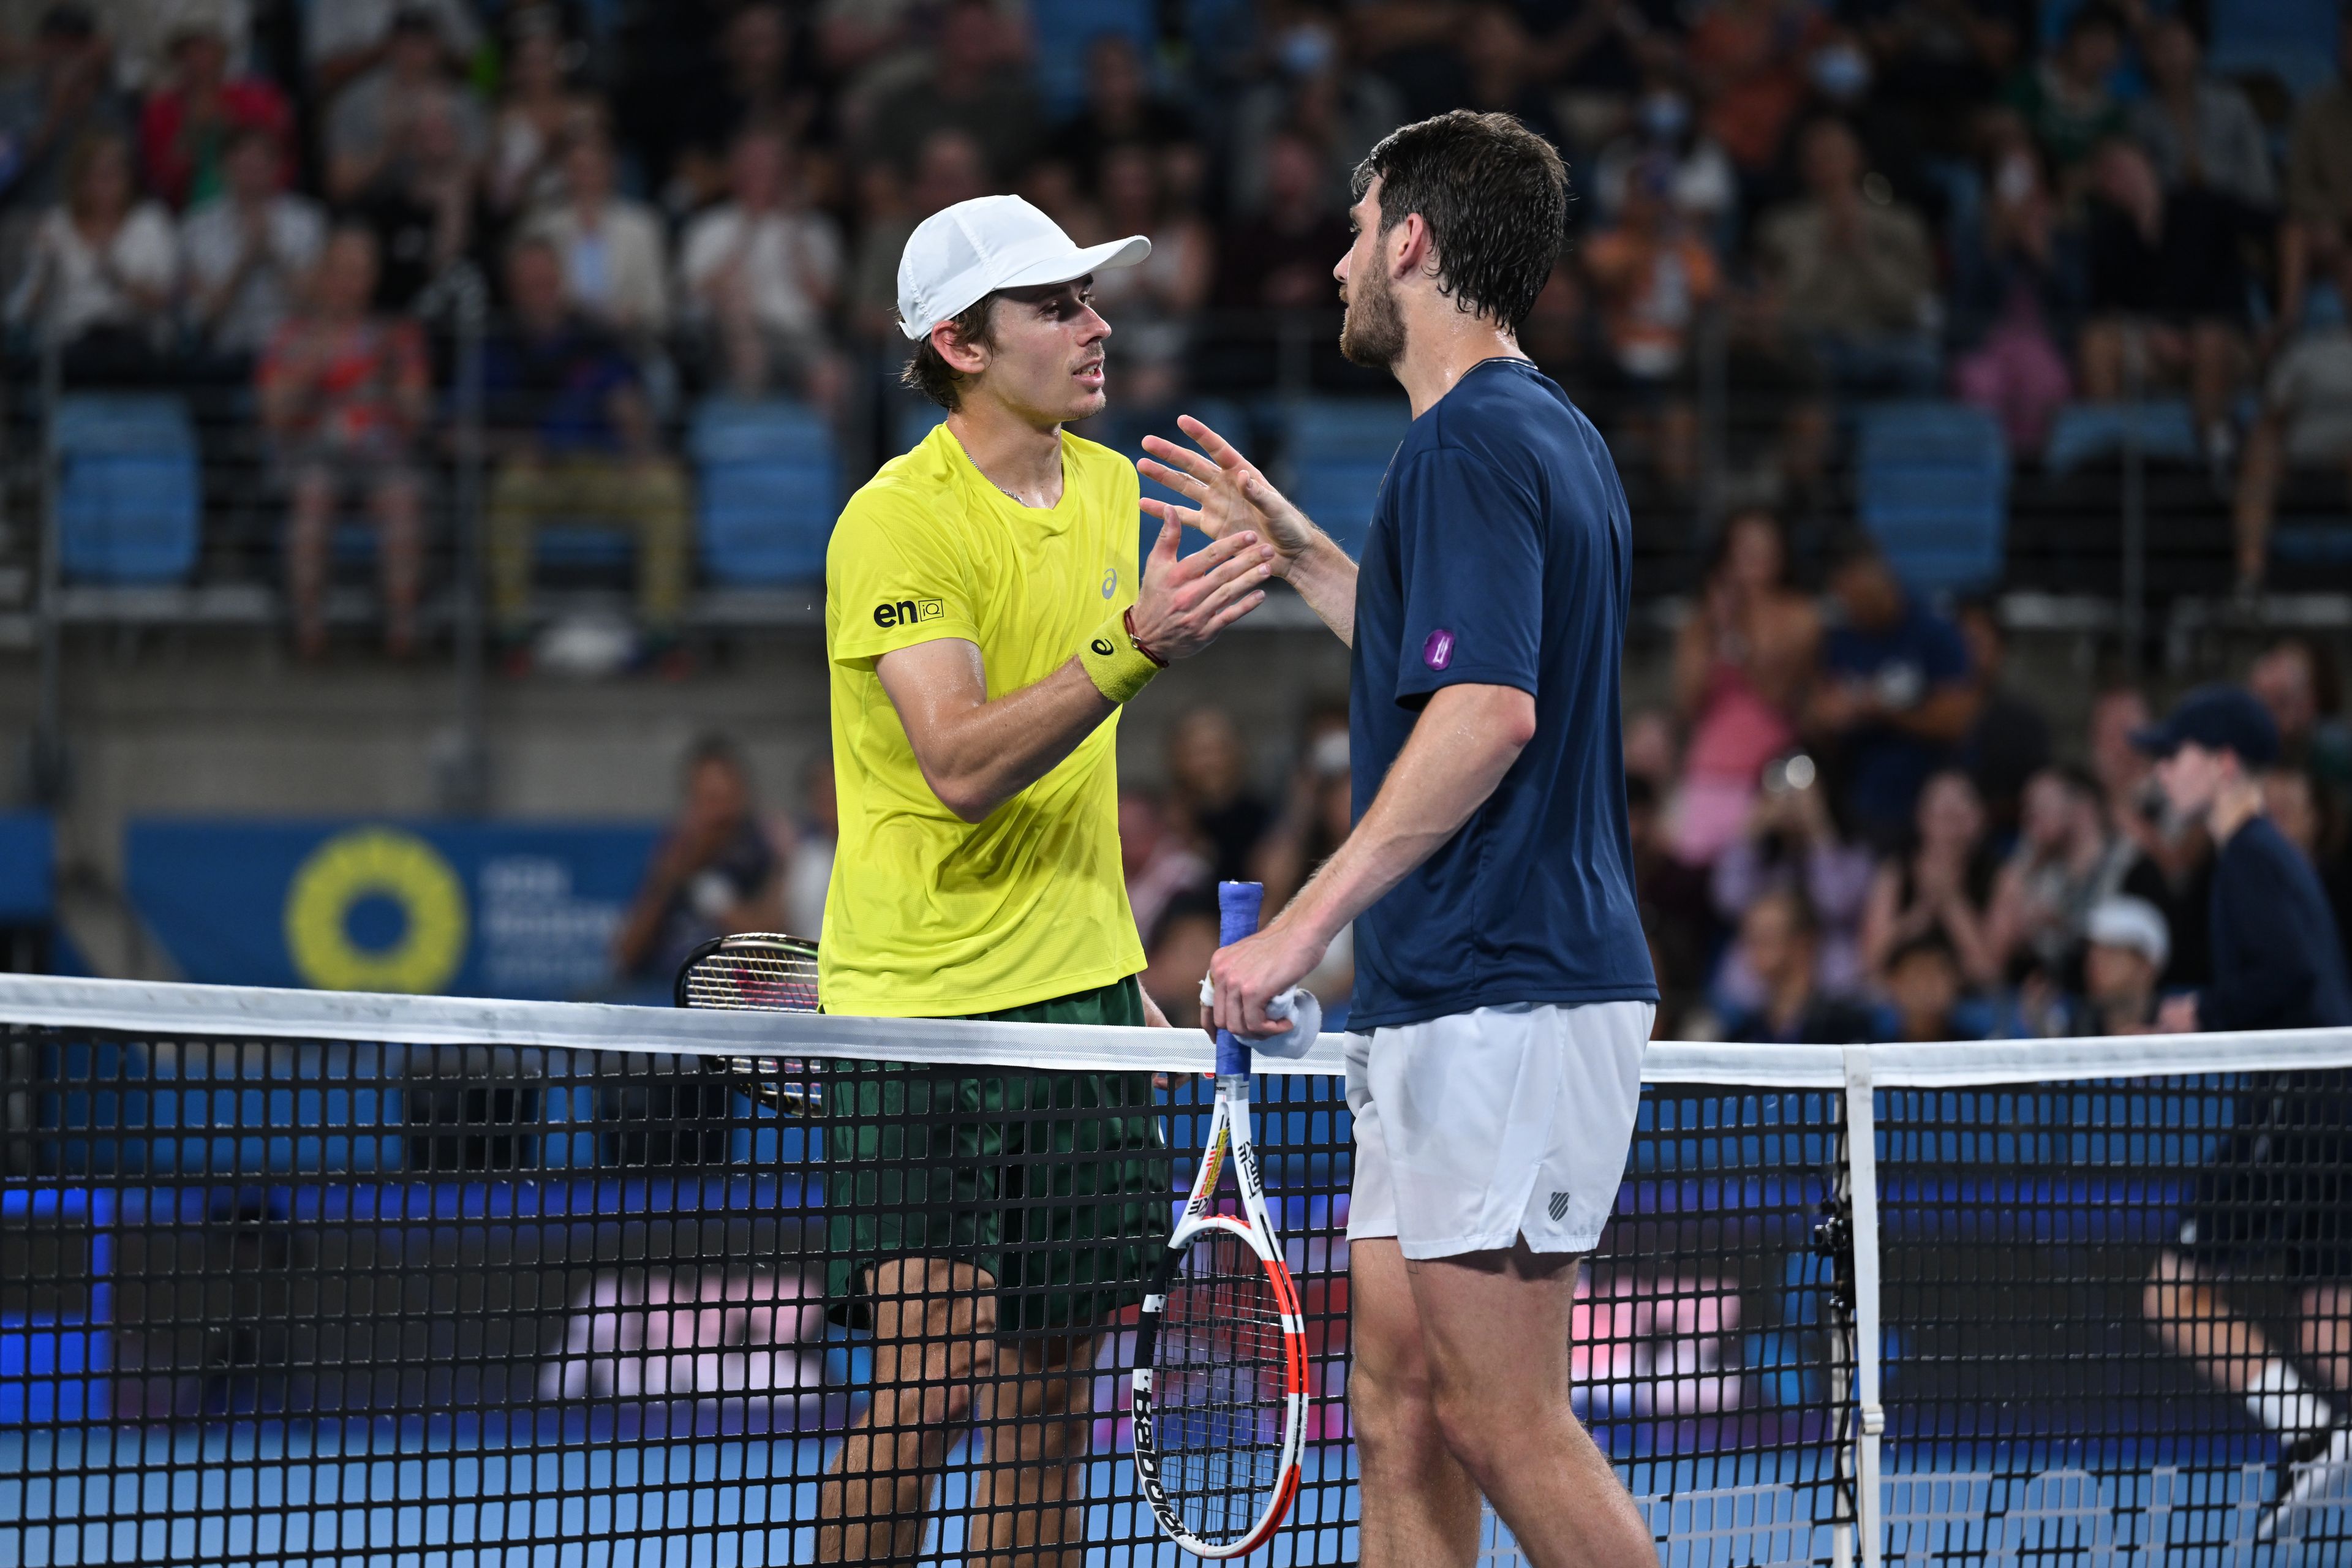 Alex De Minaur of Team Australia shakes hands with Cameron Norrie of Team Great Britain on Ken Rosewall Arena during their Group C match on Day 1 of the 2023 United Cup in Sydney on Thursday, December 29, 2022. MANDATORY PHOTO CREDIT Tennis Australia/ ATP, PETER STAPLES